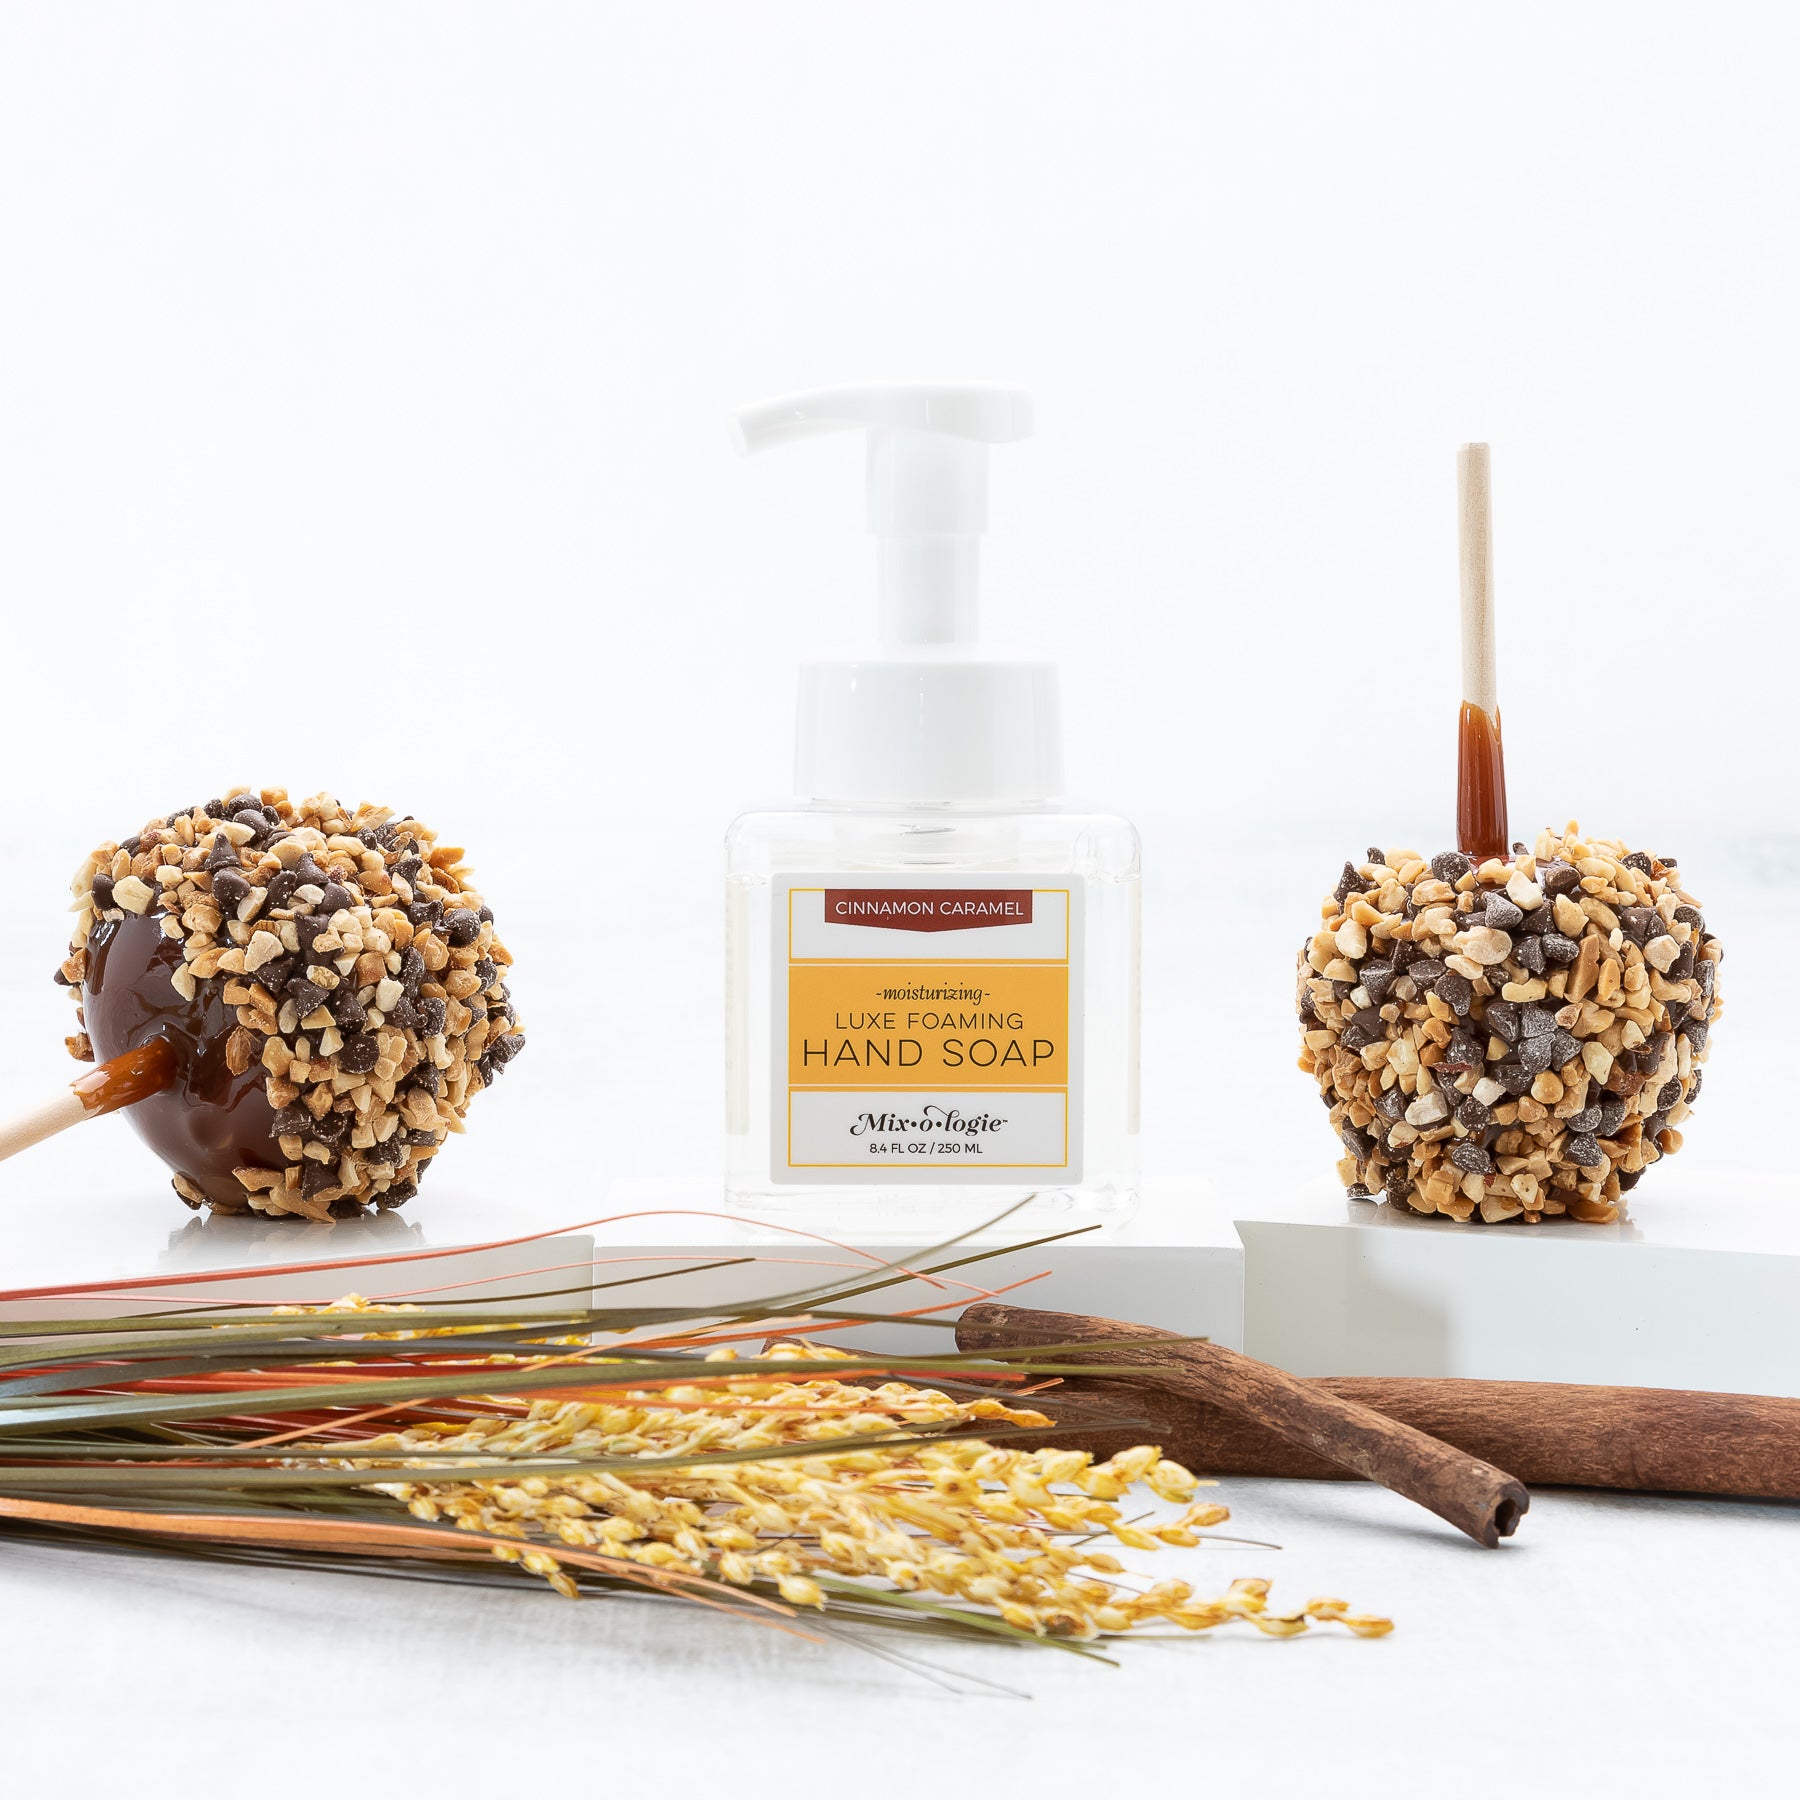 Moisturizing Luxe Foaming Hand Soap in Mixologie’s Cinnamon Carmel scent. Clear glass square shaped container with white pump that contains 8.4 fl oz or 250 ML of clear liquid. Pictured with Carmel apples, sticks, and greenery.